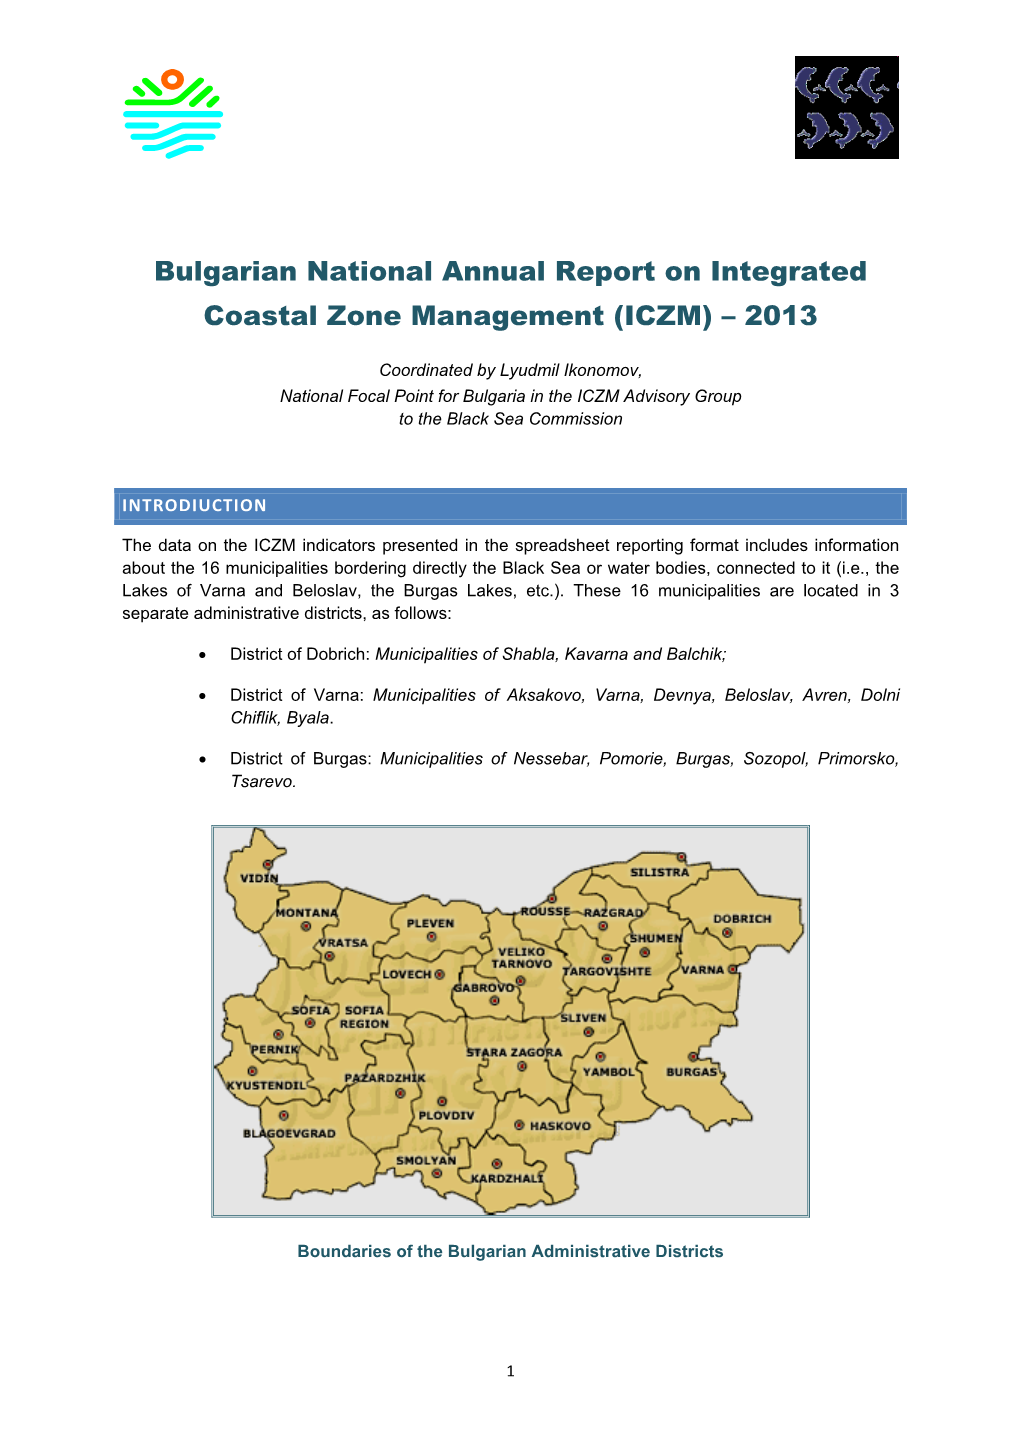 Bulgarian National Annual Report on Integrated Coastal Zone Management (ICZM) – 2013